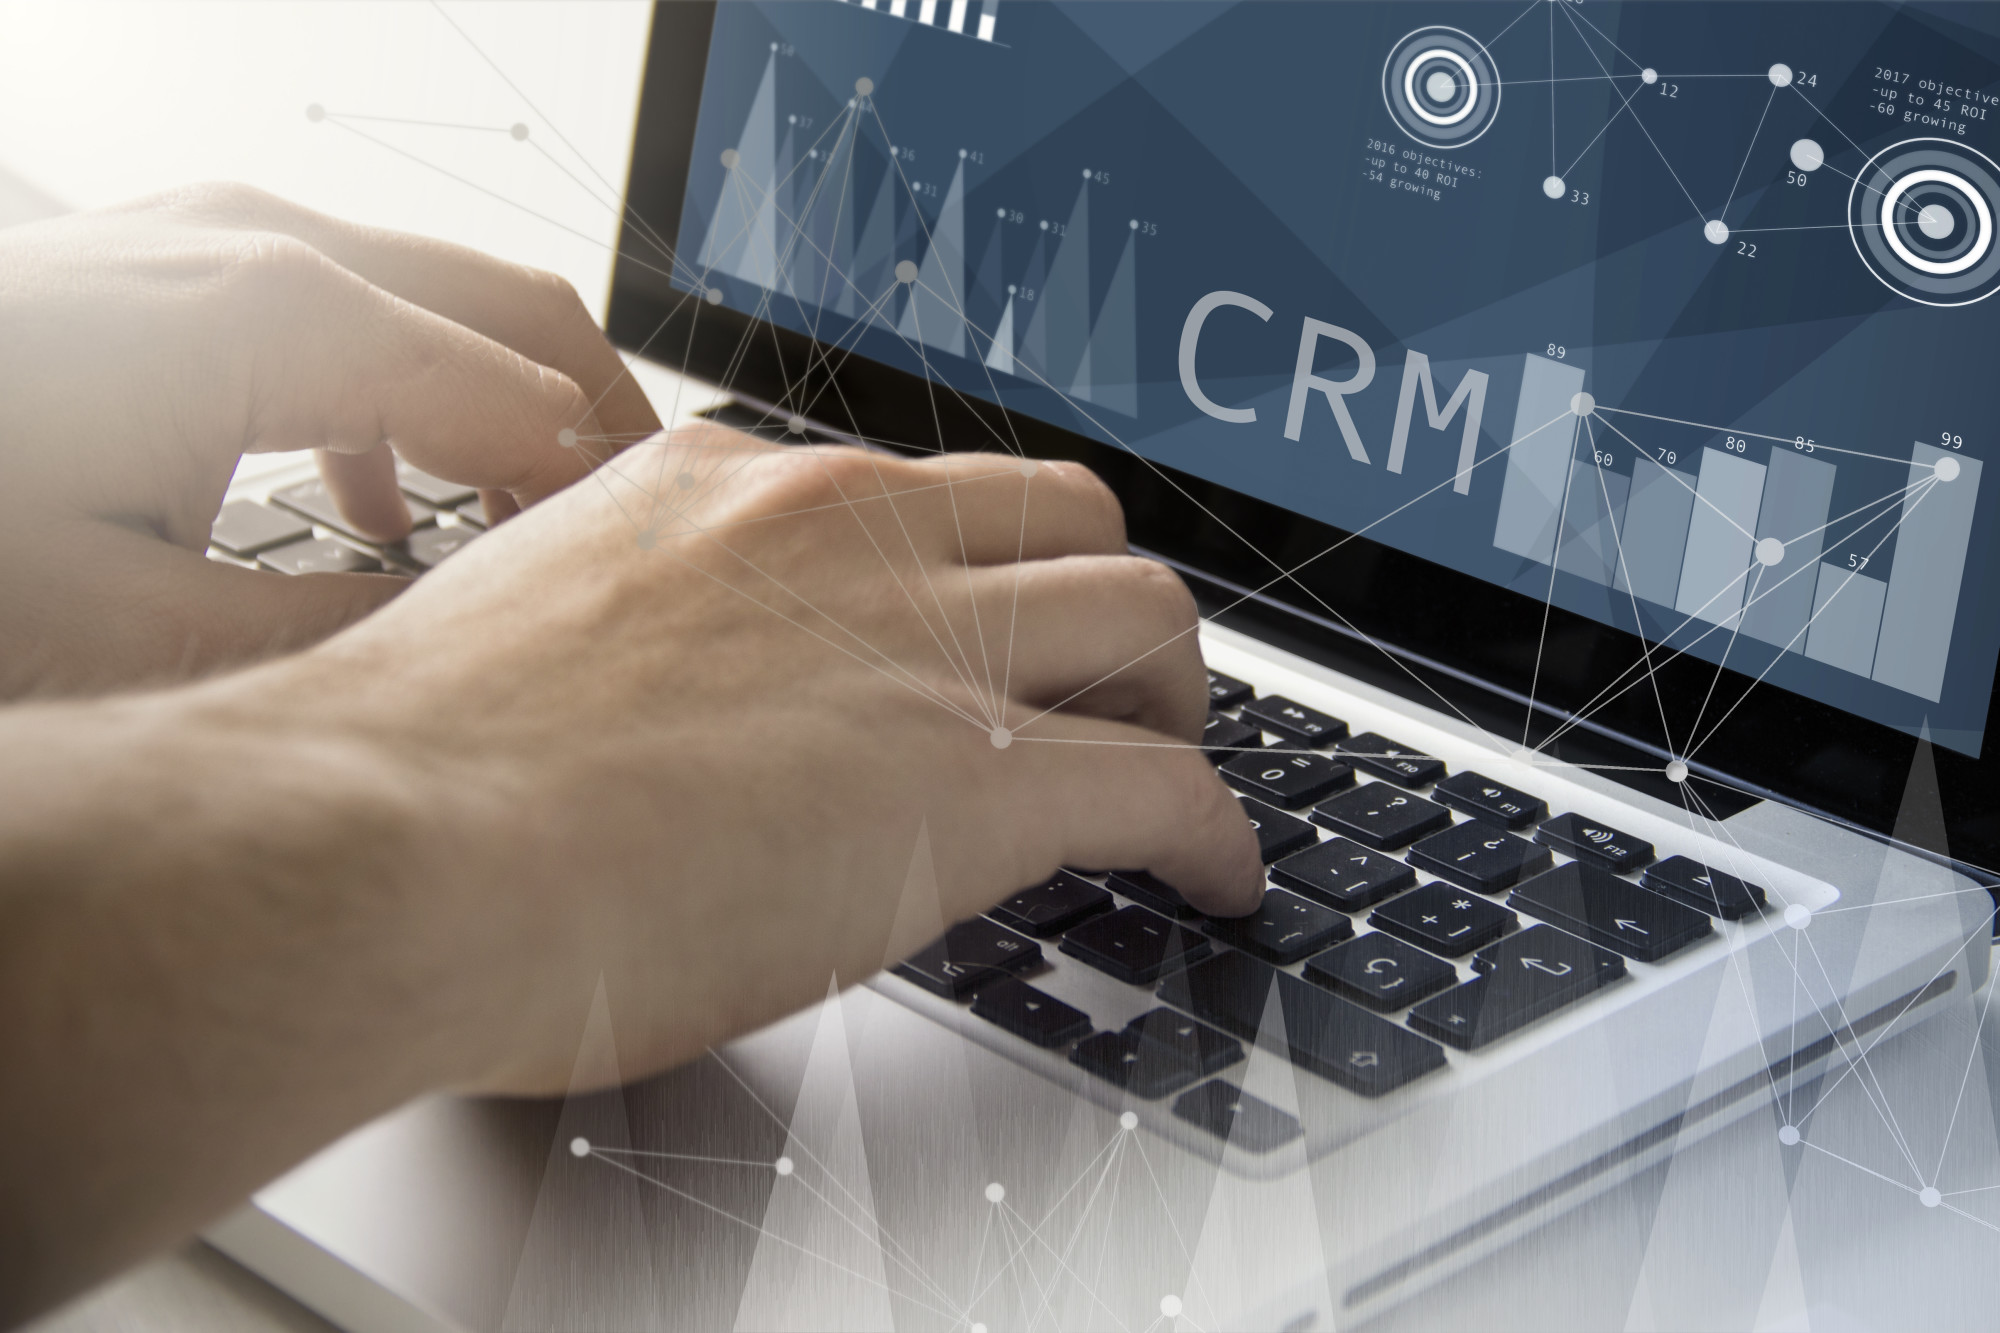 crm with marketing automation